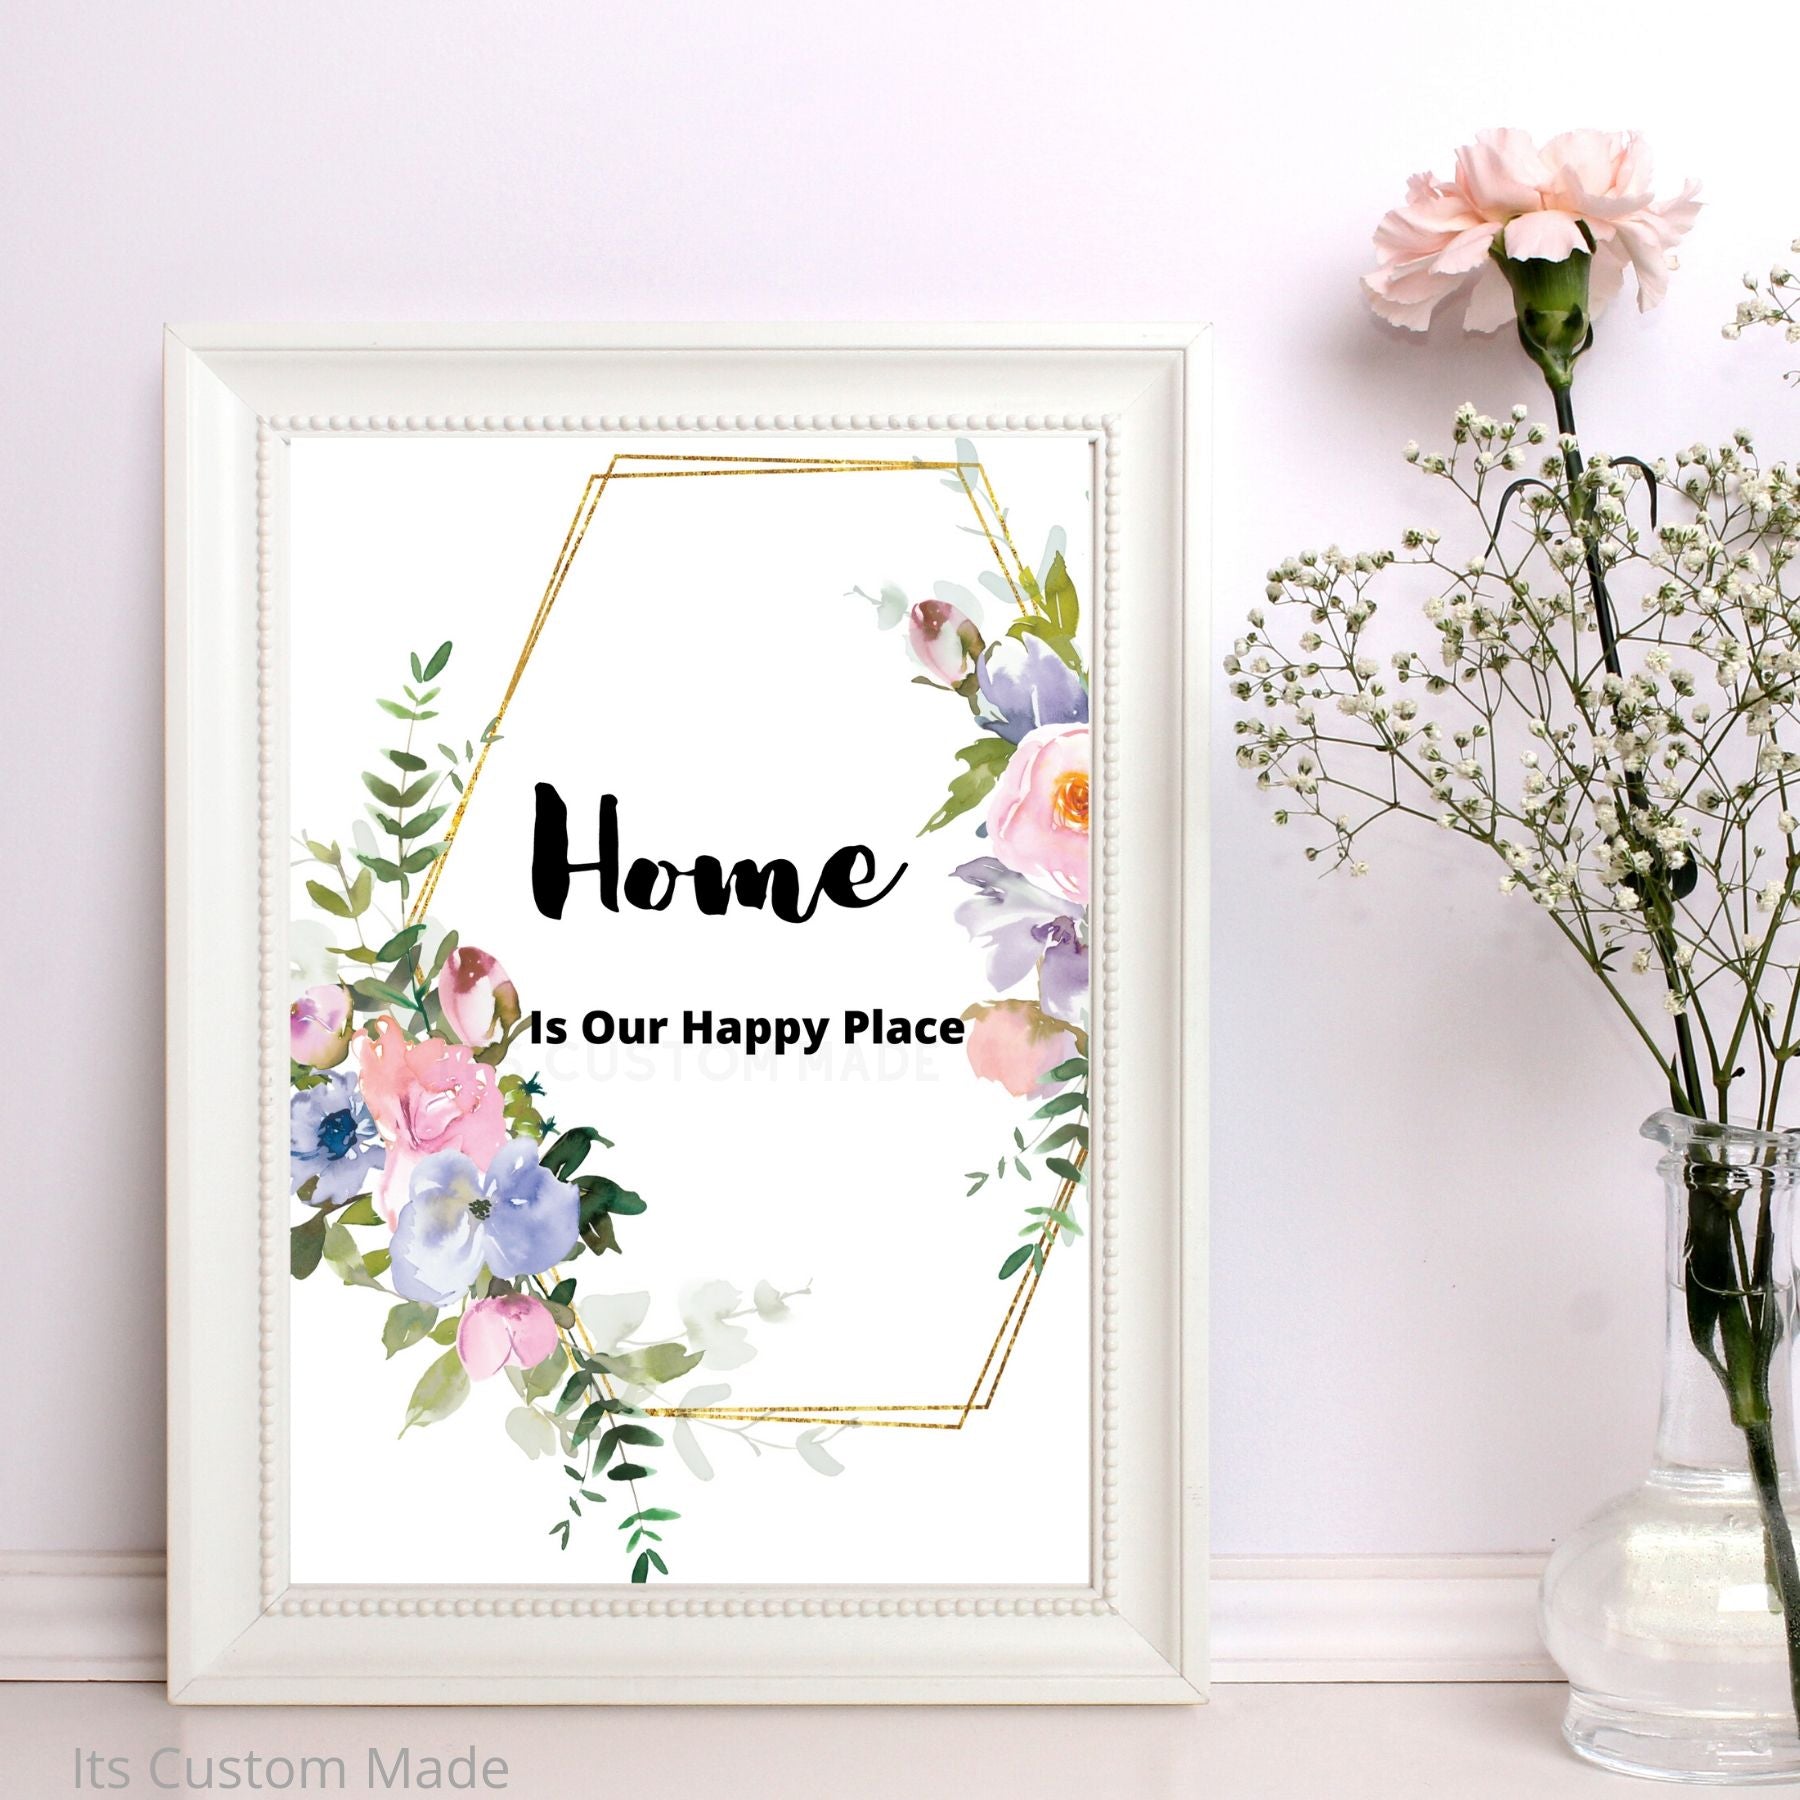 Home Is Our Happy Place Wall Art Decor - Home Wall Art Decor - Wall Art Printable - Home Sign Prints - Home Prints Wall Art Sign - Botanical Home Decor Wall Art - Watercolor Art Sign